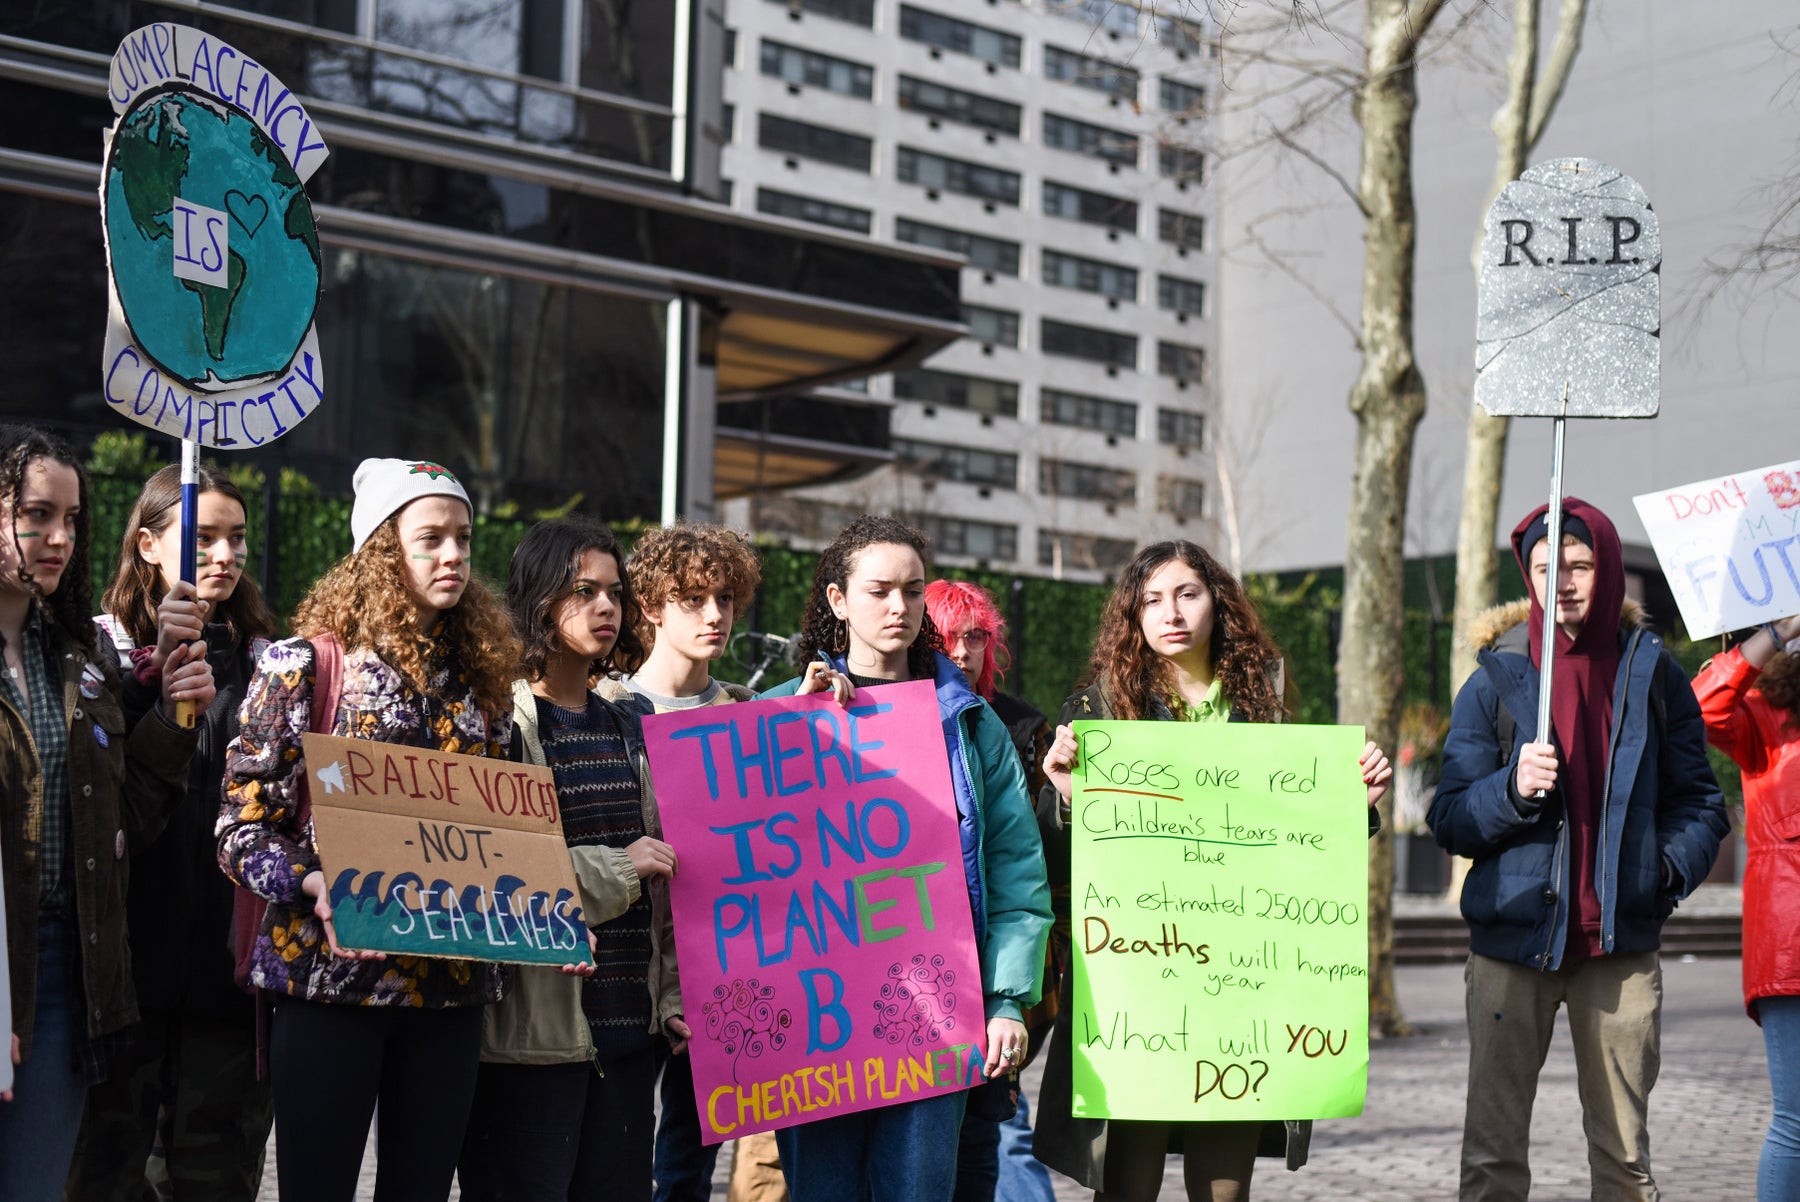 Young activists protesting in the street